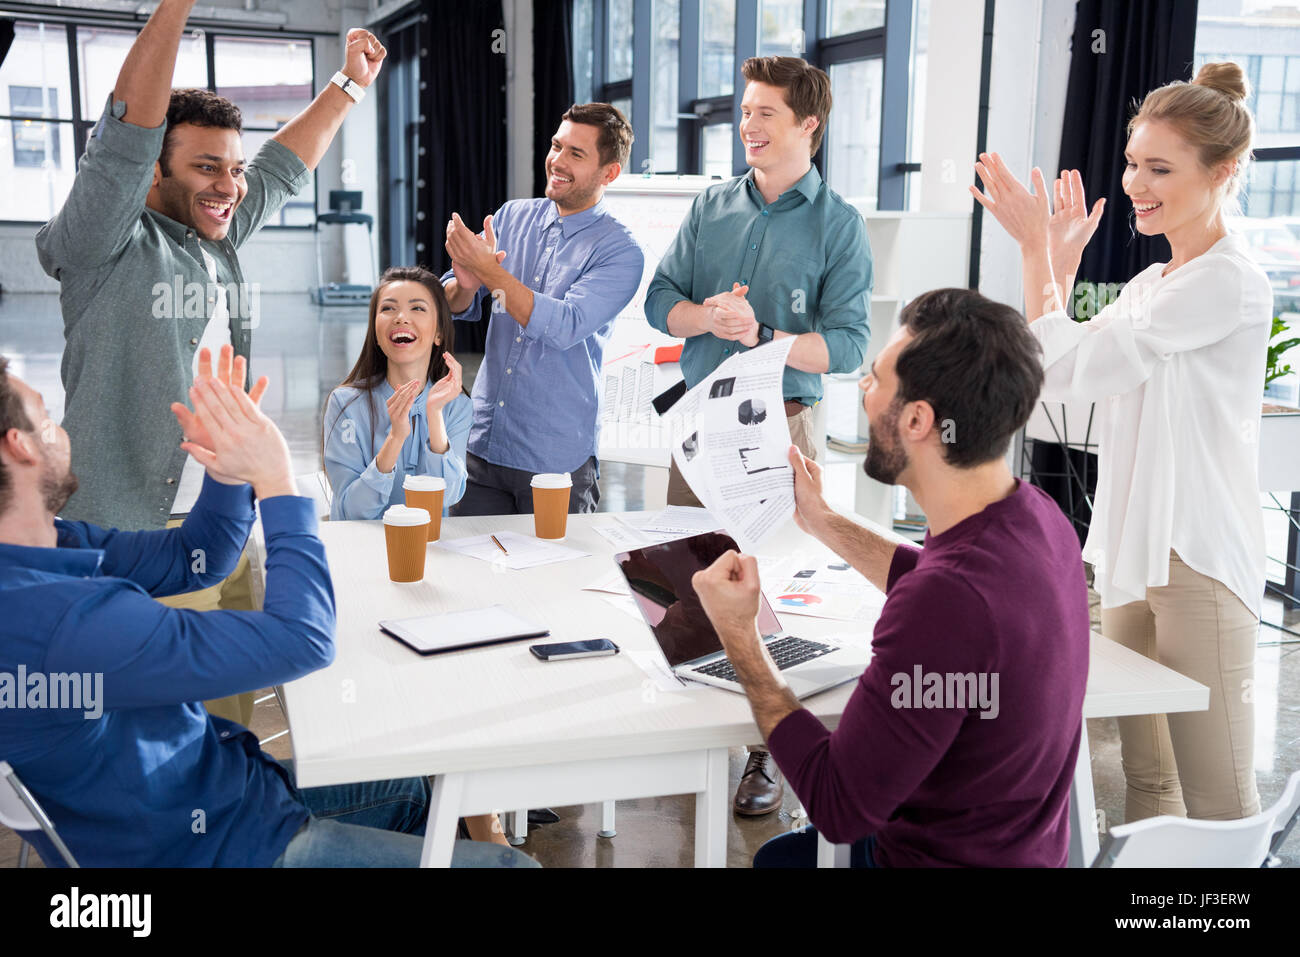 business team celebrating success together on workplace in office, young professional group concept Stock Photo